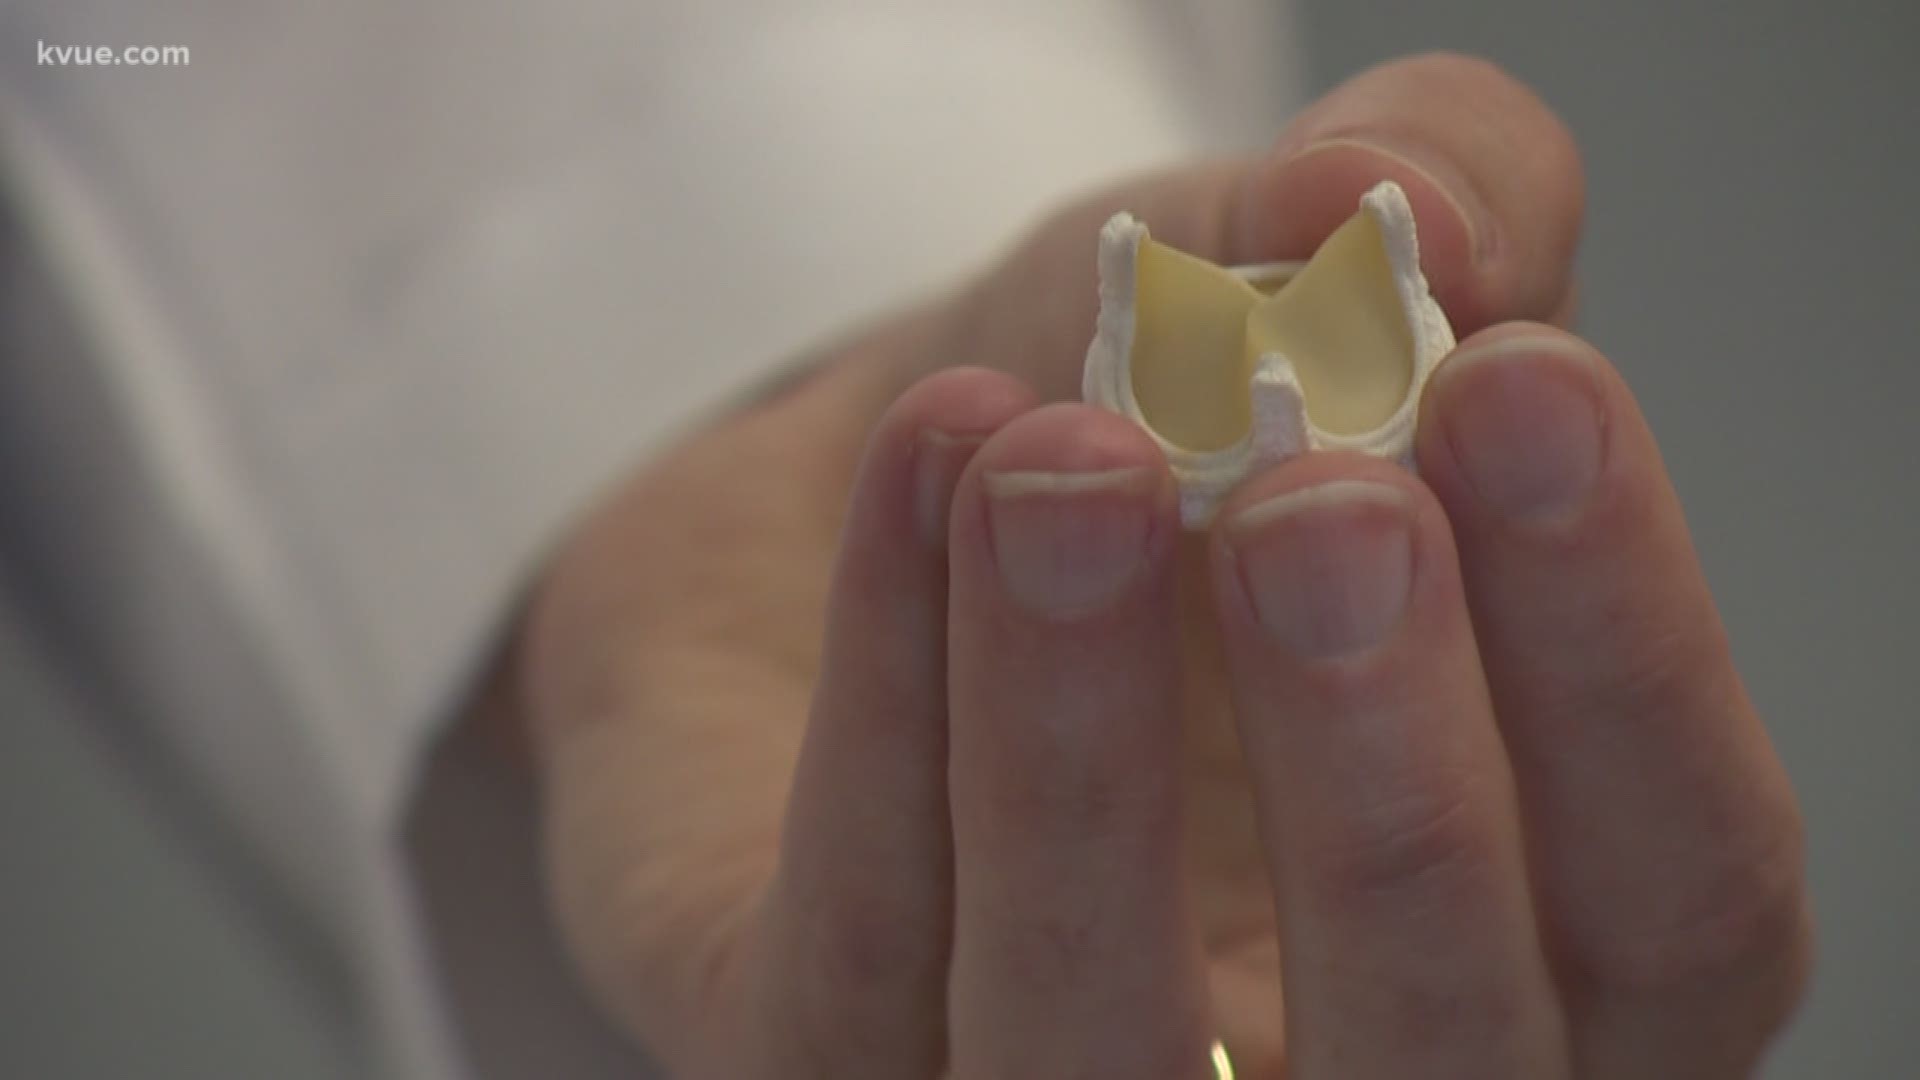 There's a new valve implant for patients with aortic valve disease. It's supposed to help them avoid further open heart surgeries for years to come.